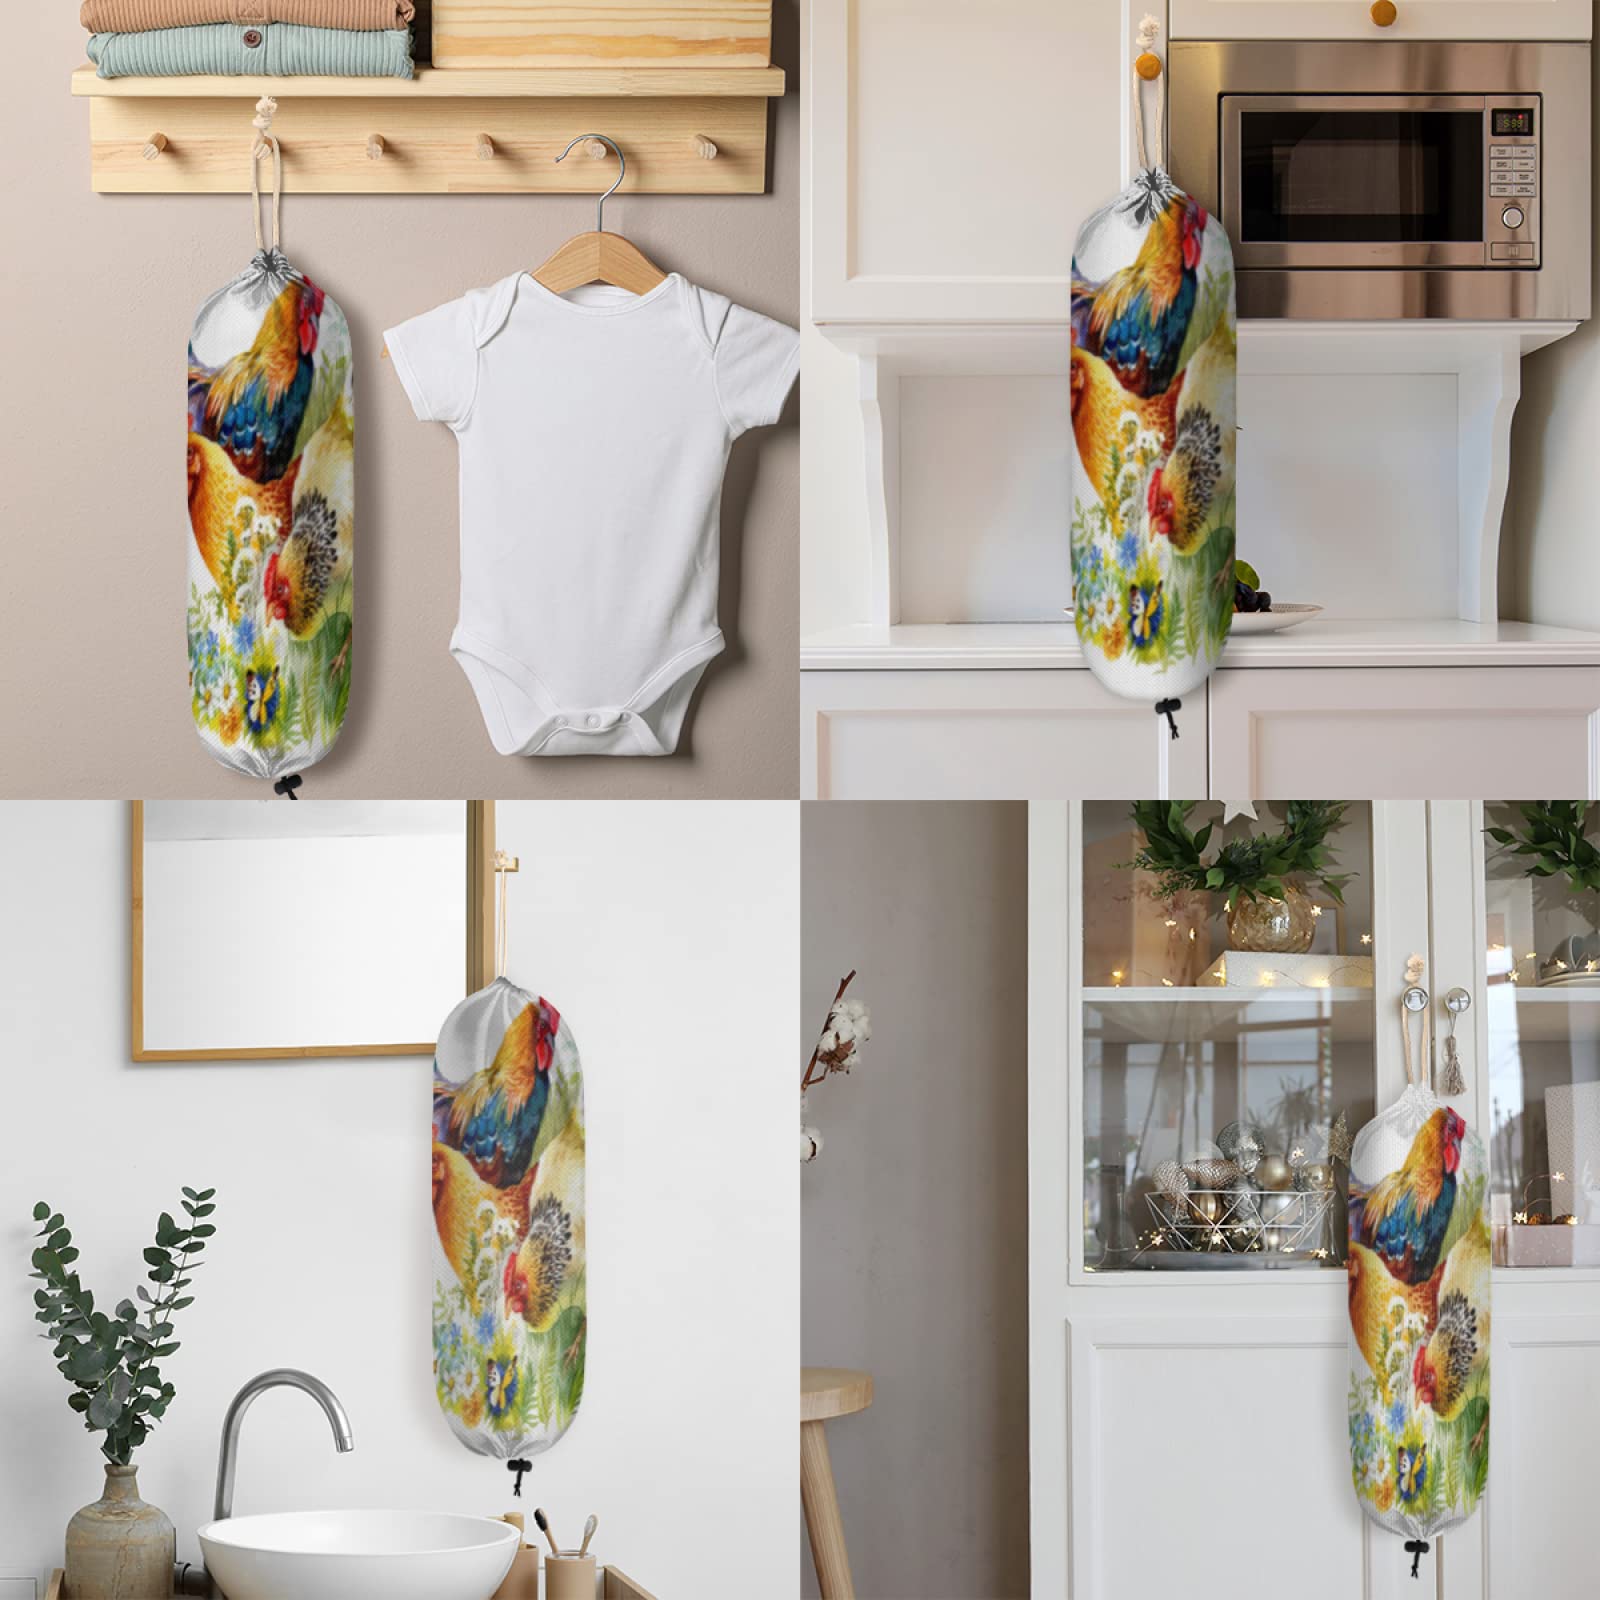 Rooster Plastic Bag Holder, Chicken Rooster Pattern Wall Mount Plastic Bag Organizer with Drawstring Grocery Shopping Bags Storage Dispenser for Home Kitchen Farmhouse Decor, 22X9 Inch